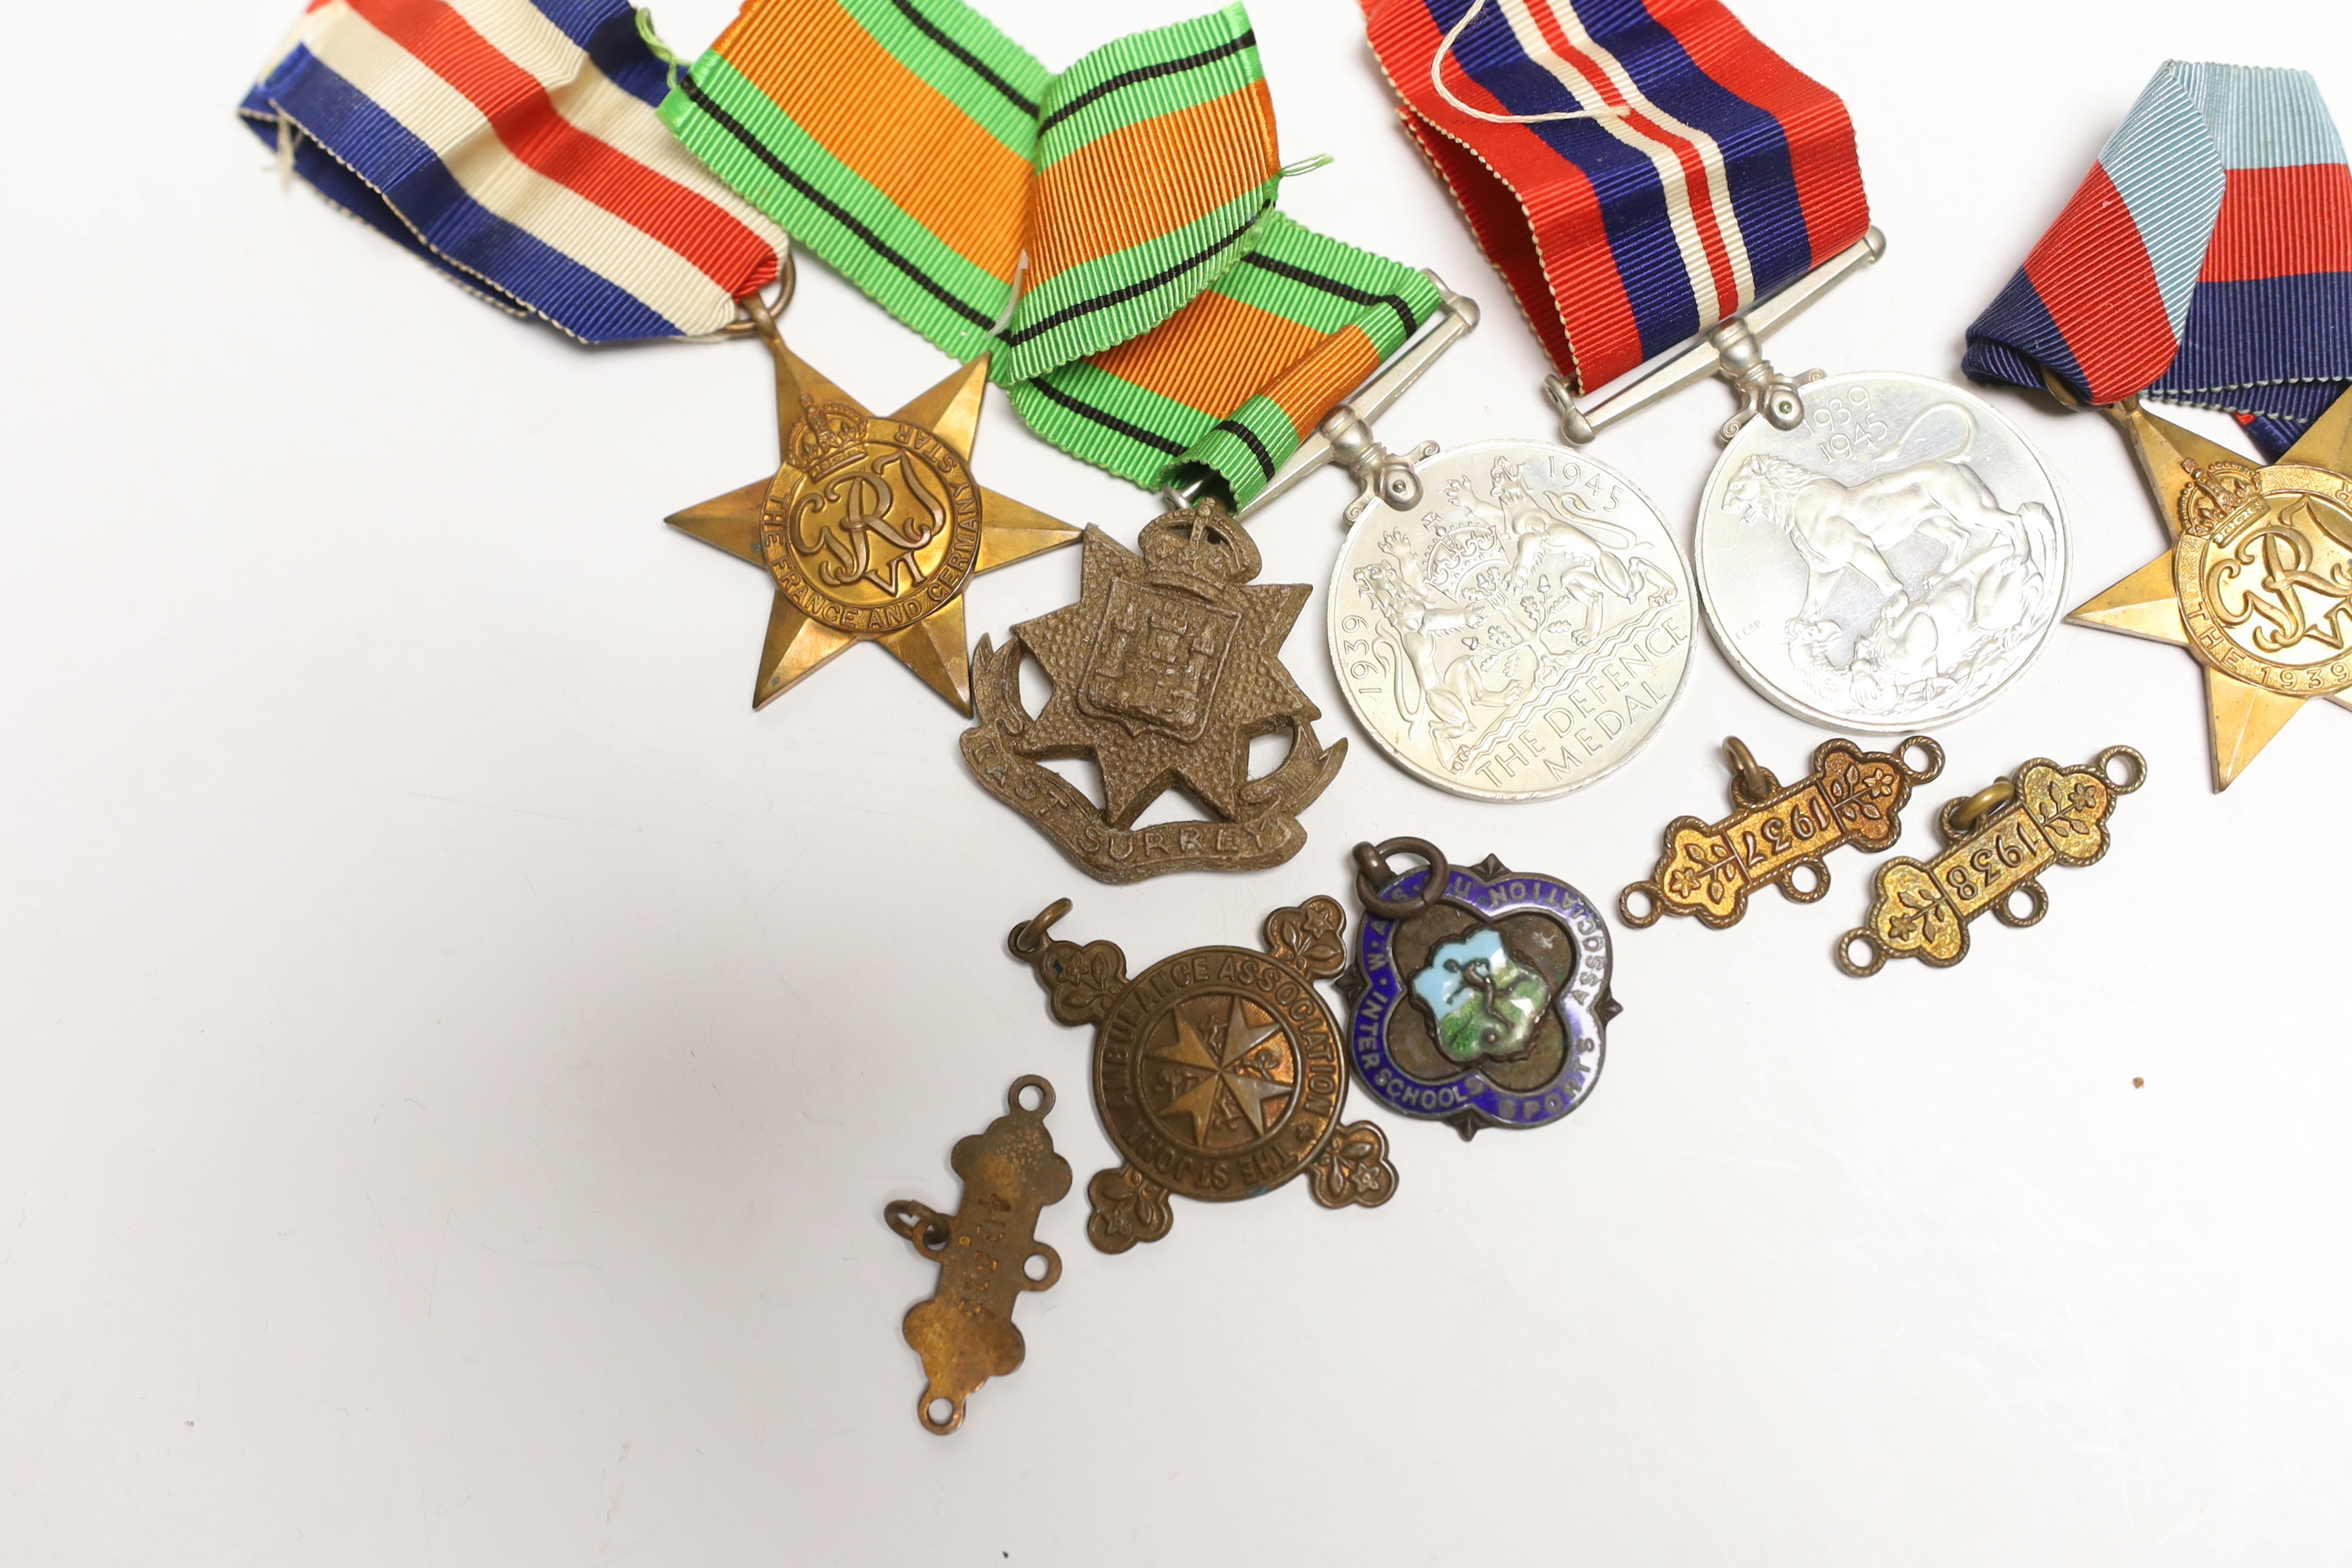 Four WW2 medals- the Defence Medal, the War medal, the 1939-1945 Star and the France & Germany Star and other minor items.